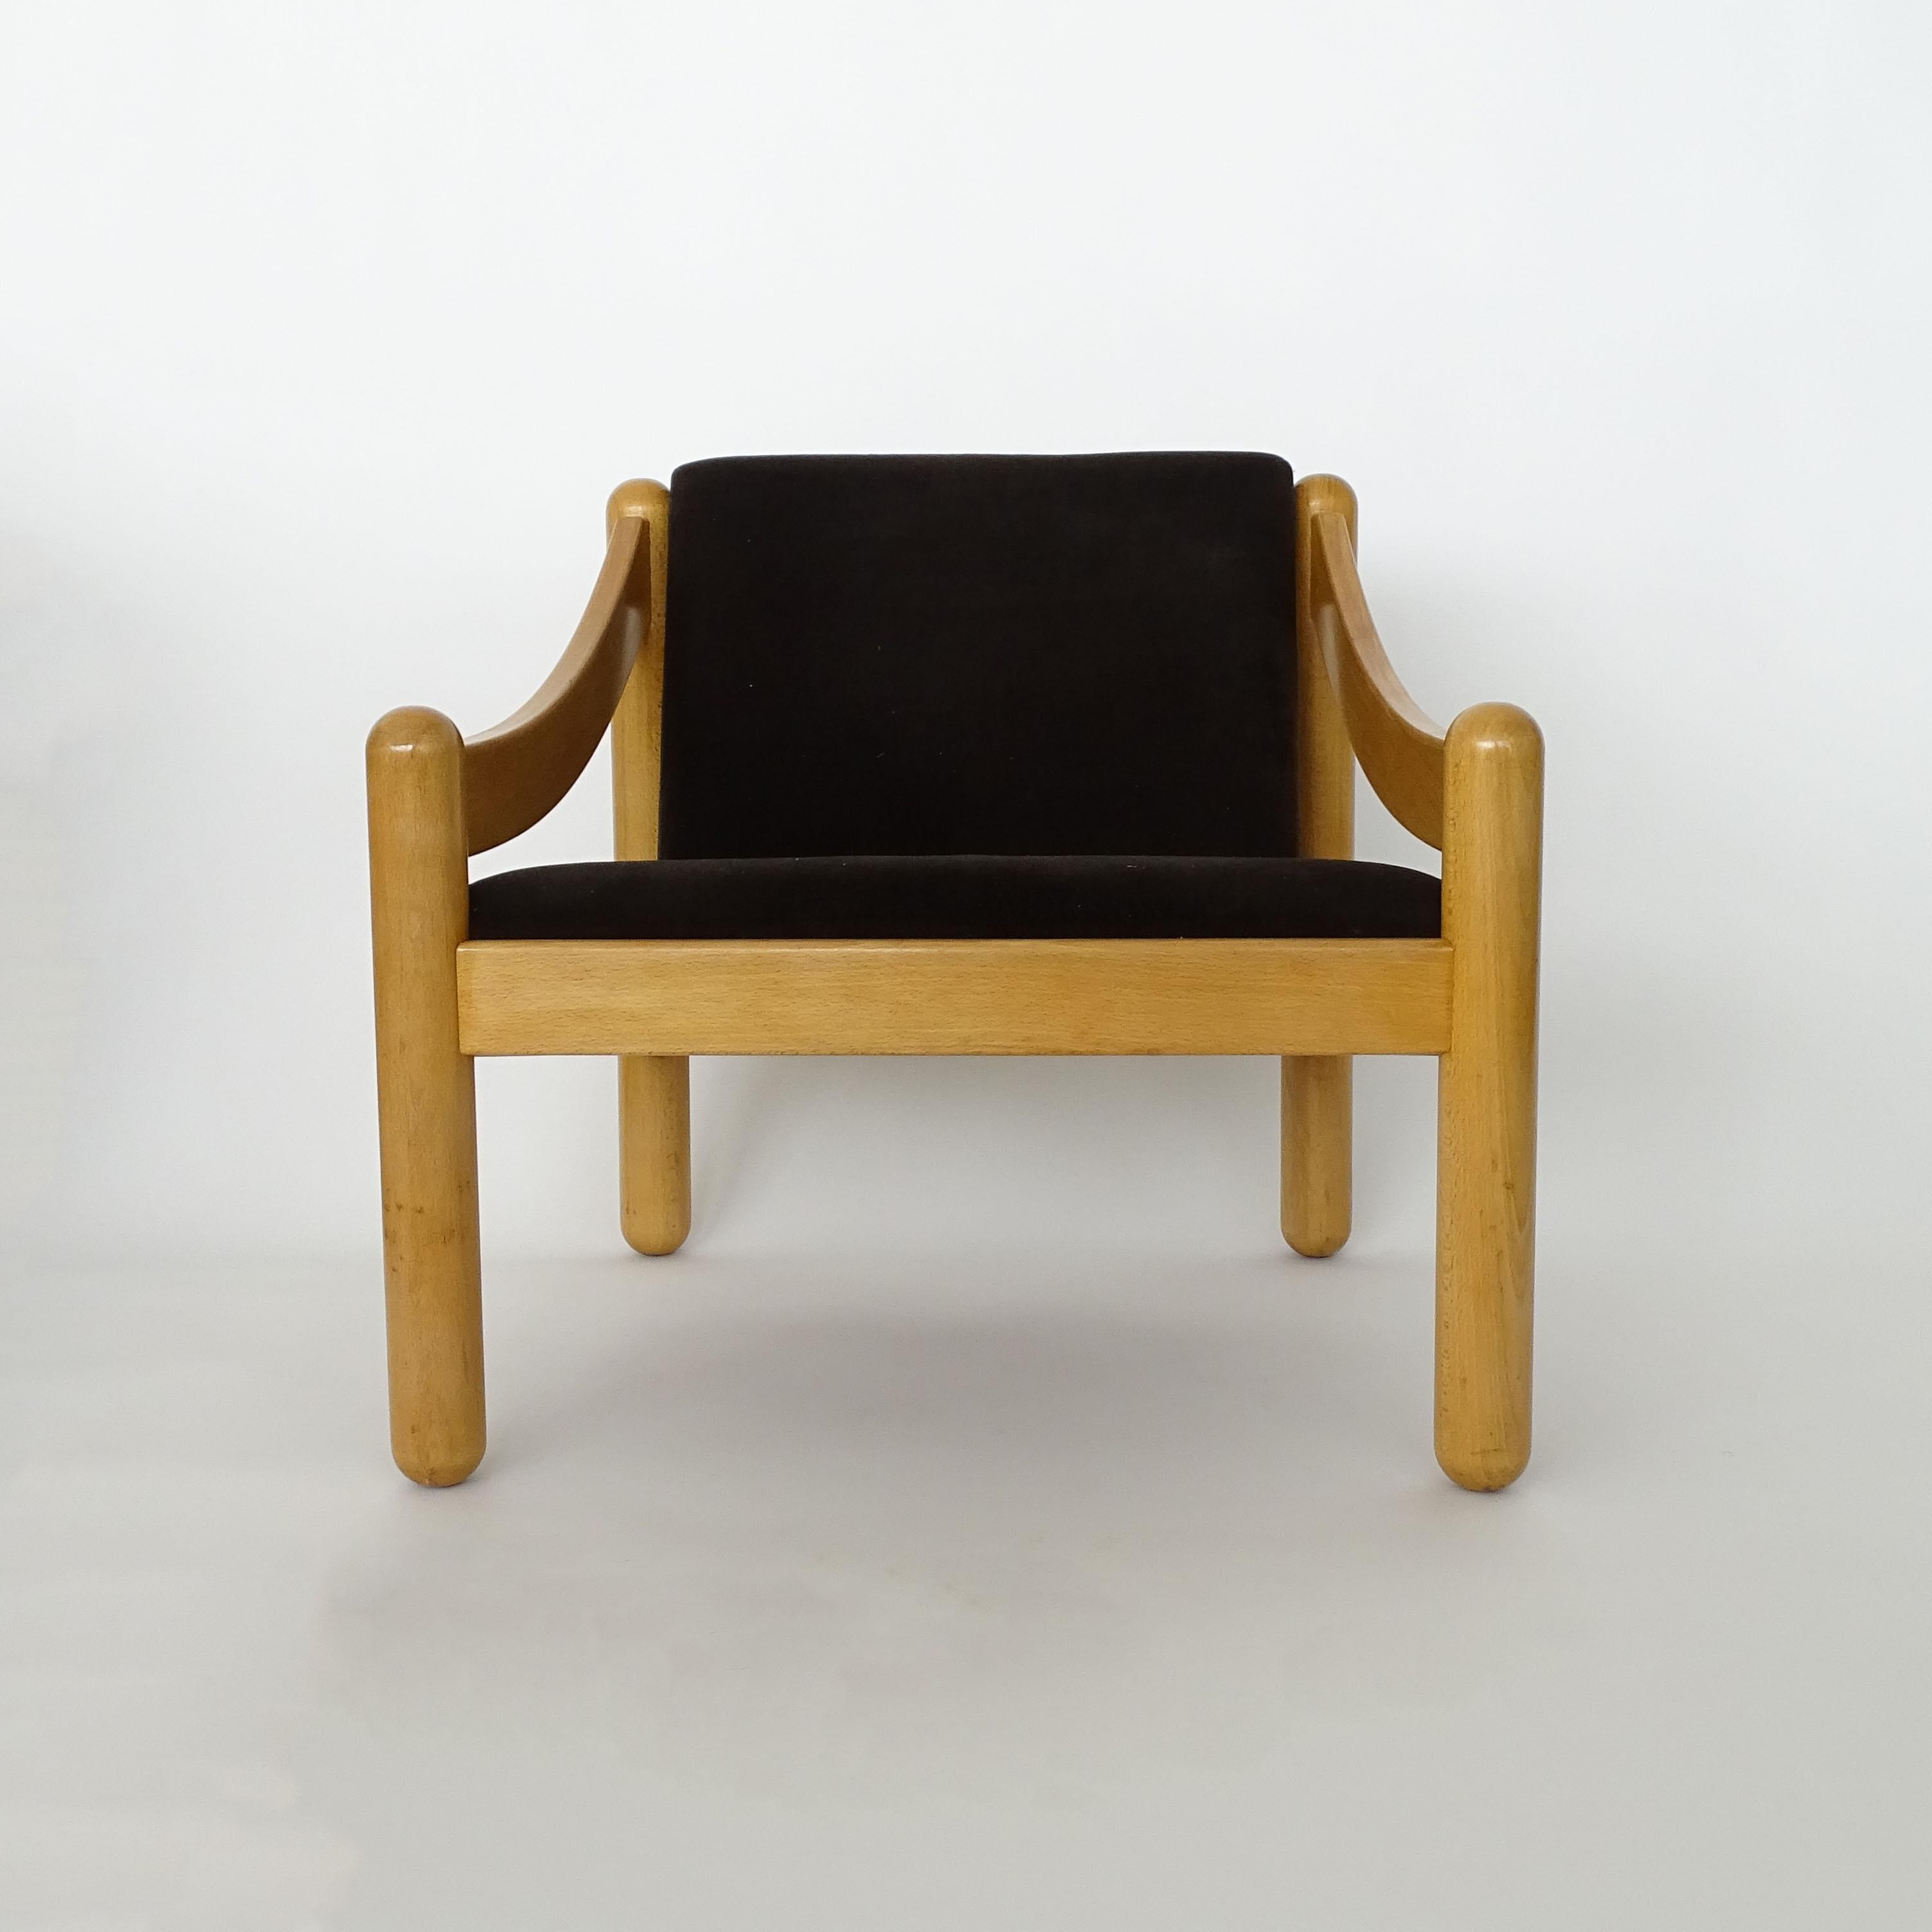 Mid-20th Century Vico Magistretti pair of Carimate lounge chairs for Cassina, Italy 1960s For Sale